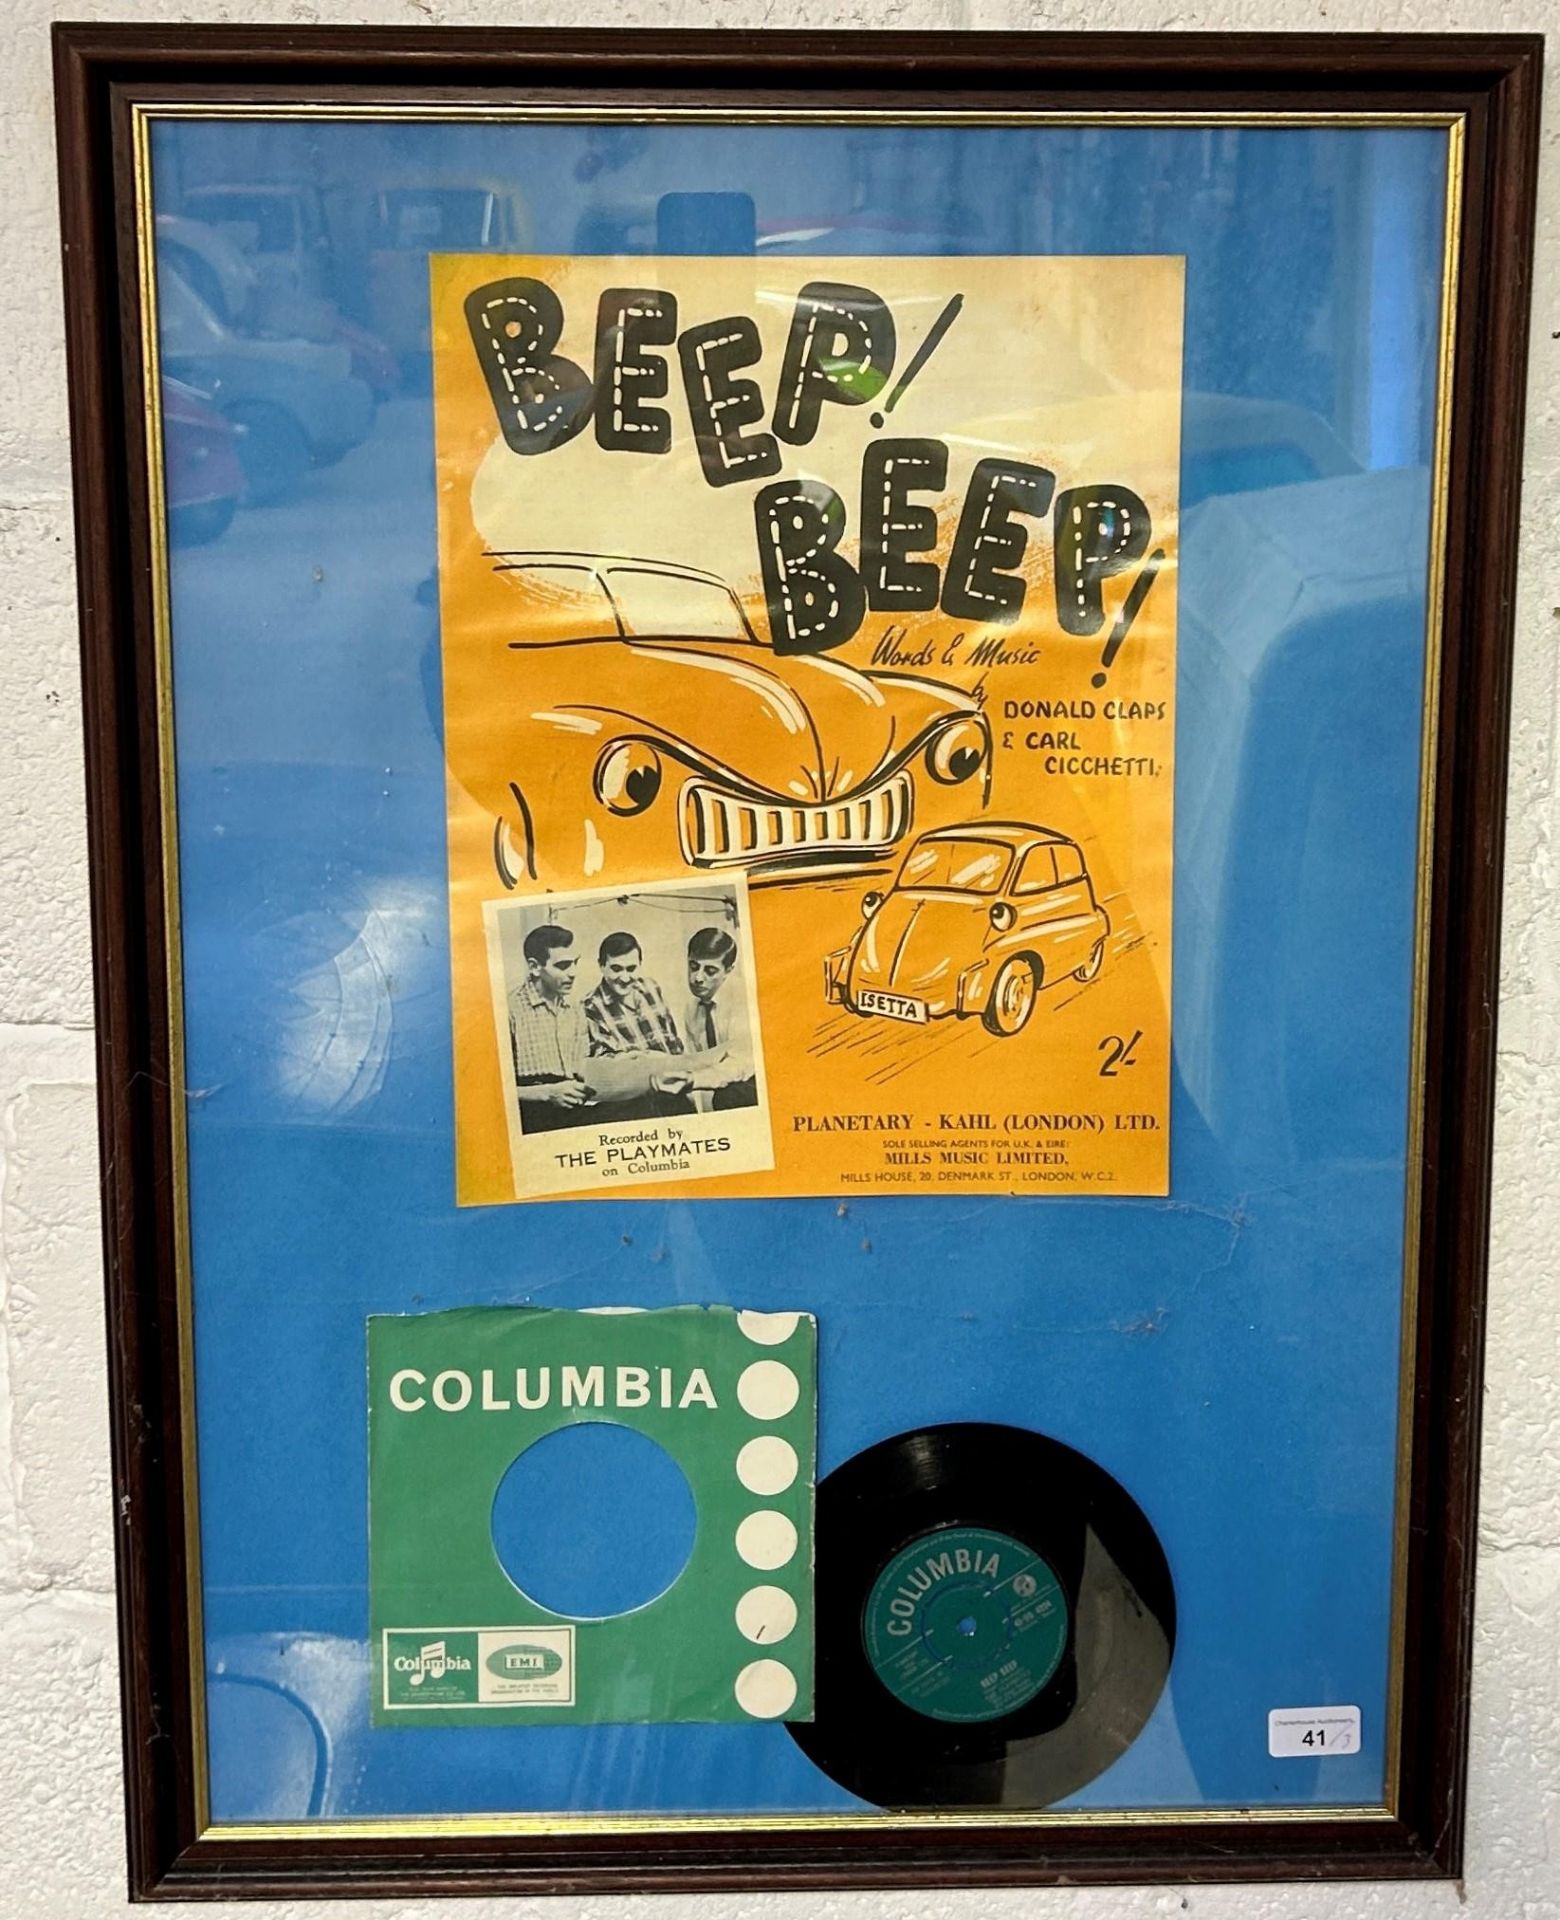 A 45 rpm record, Beep Beep by The Palymates, framed with a promotional poster featuring an Isetta, a